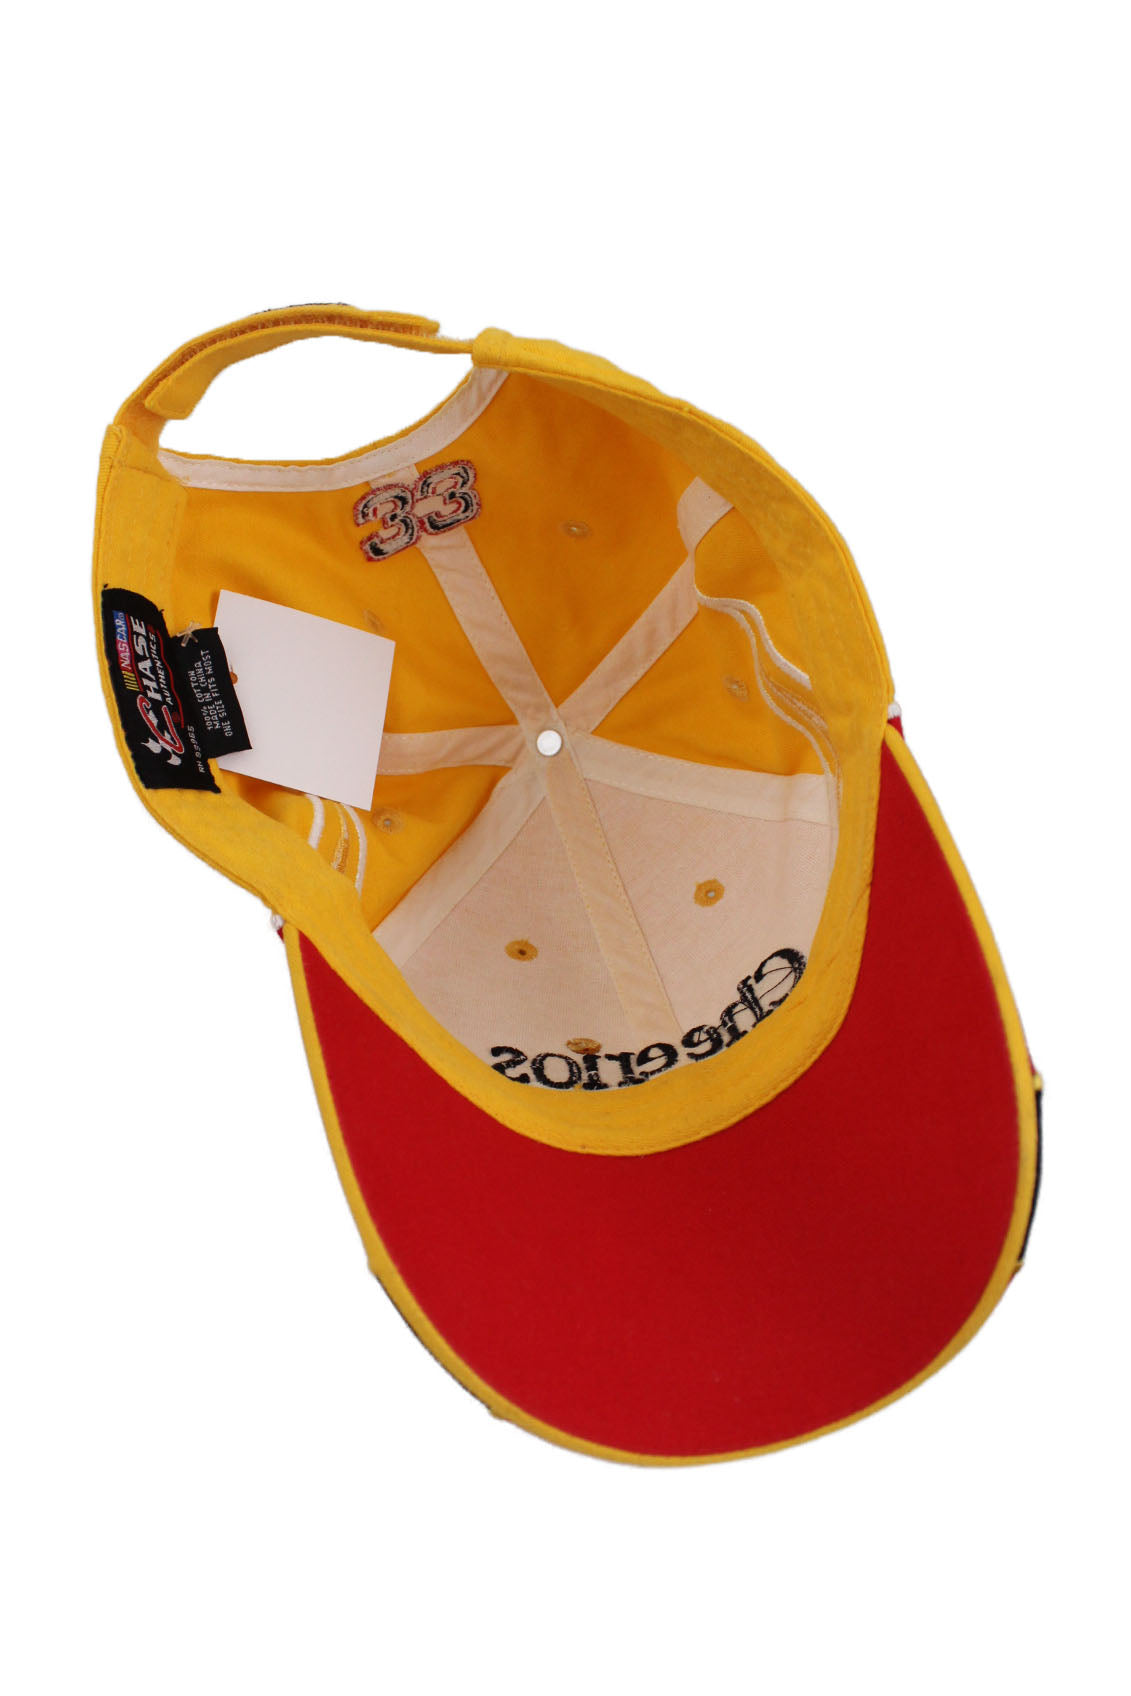 underside view with 'nascar chase authentics' logo tag of hat.